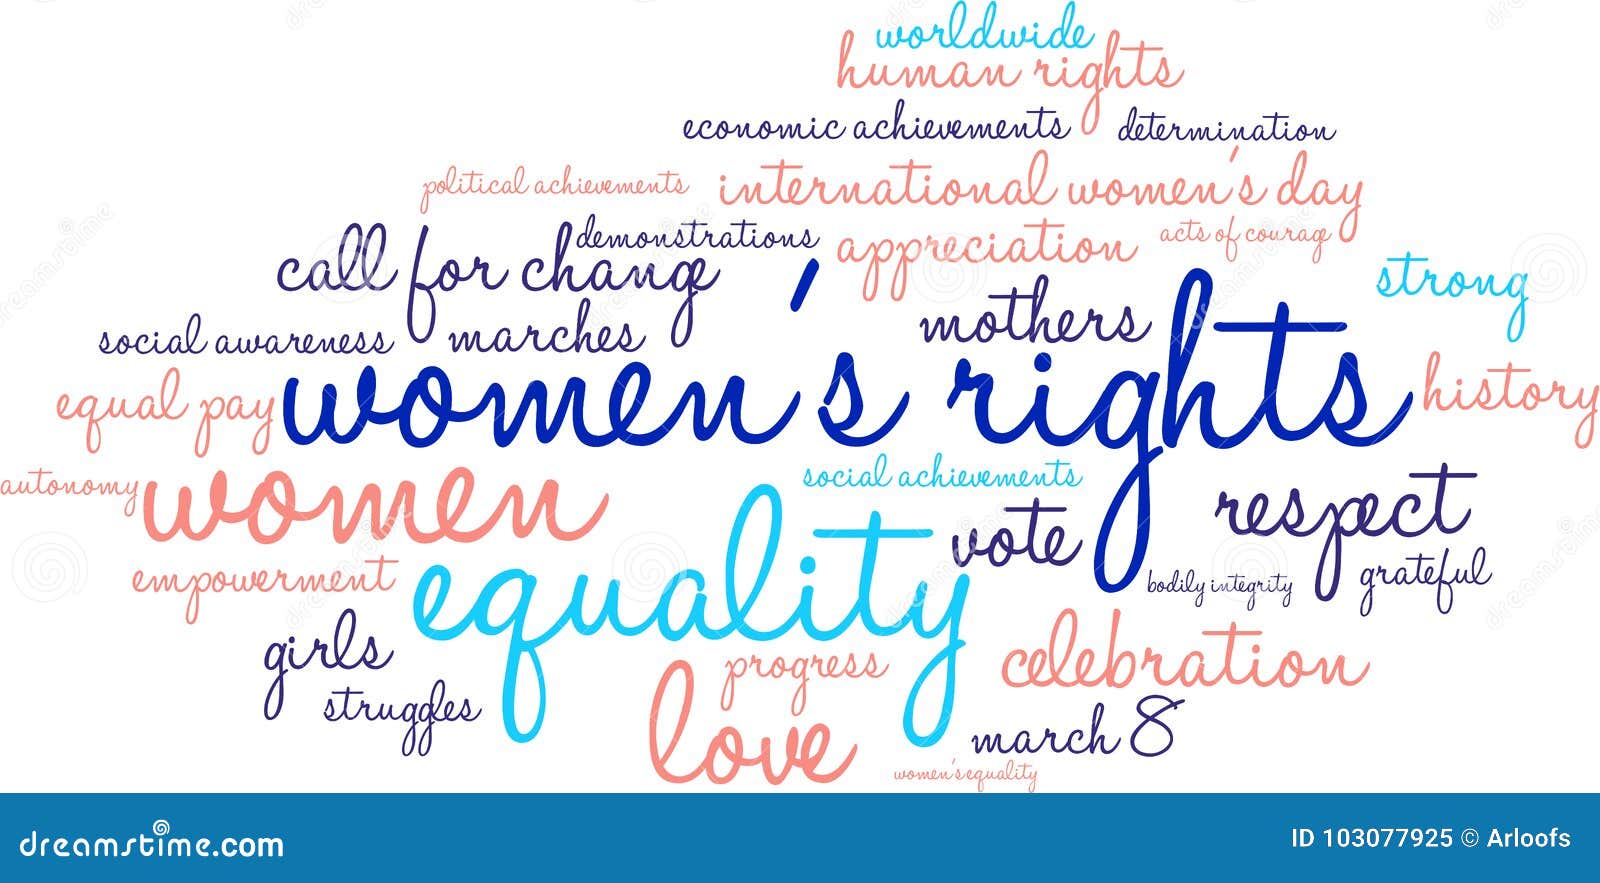 womens rights word cloud